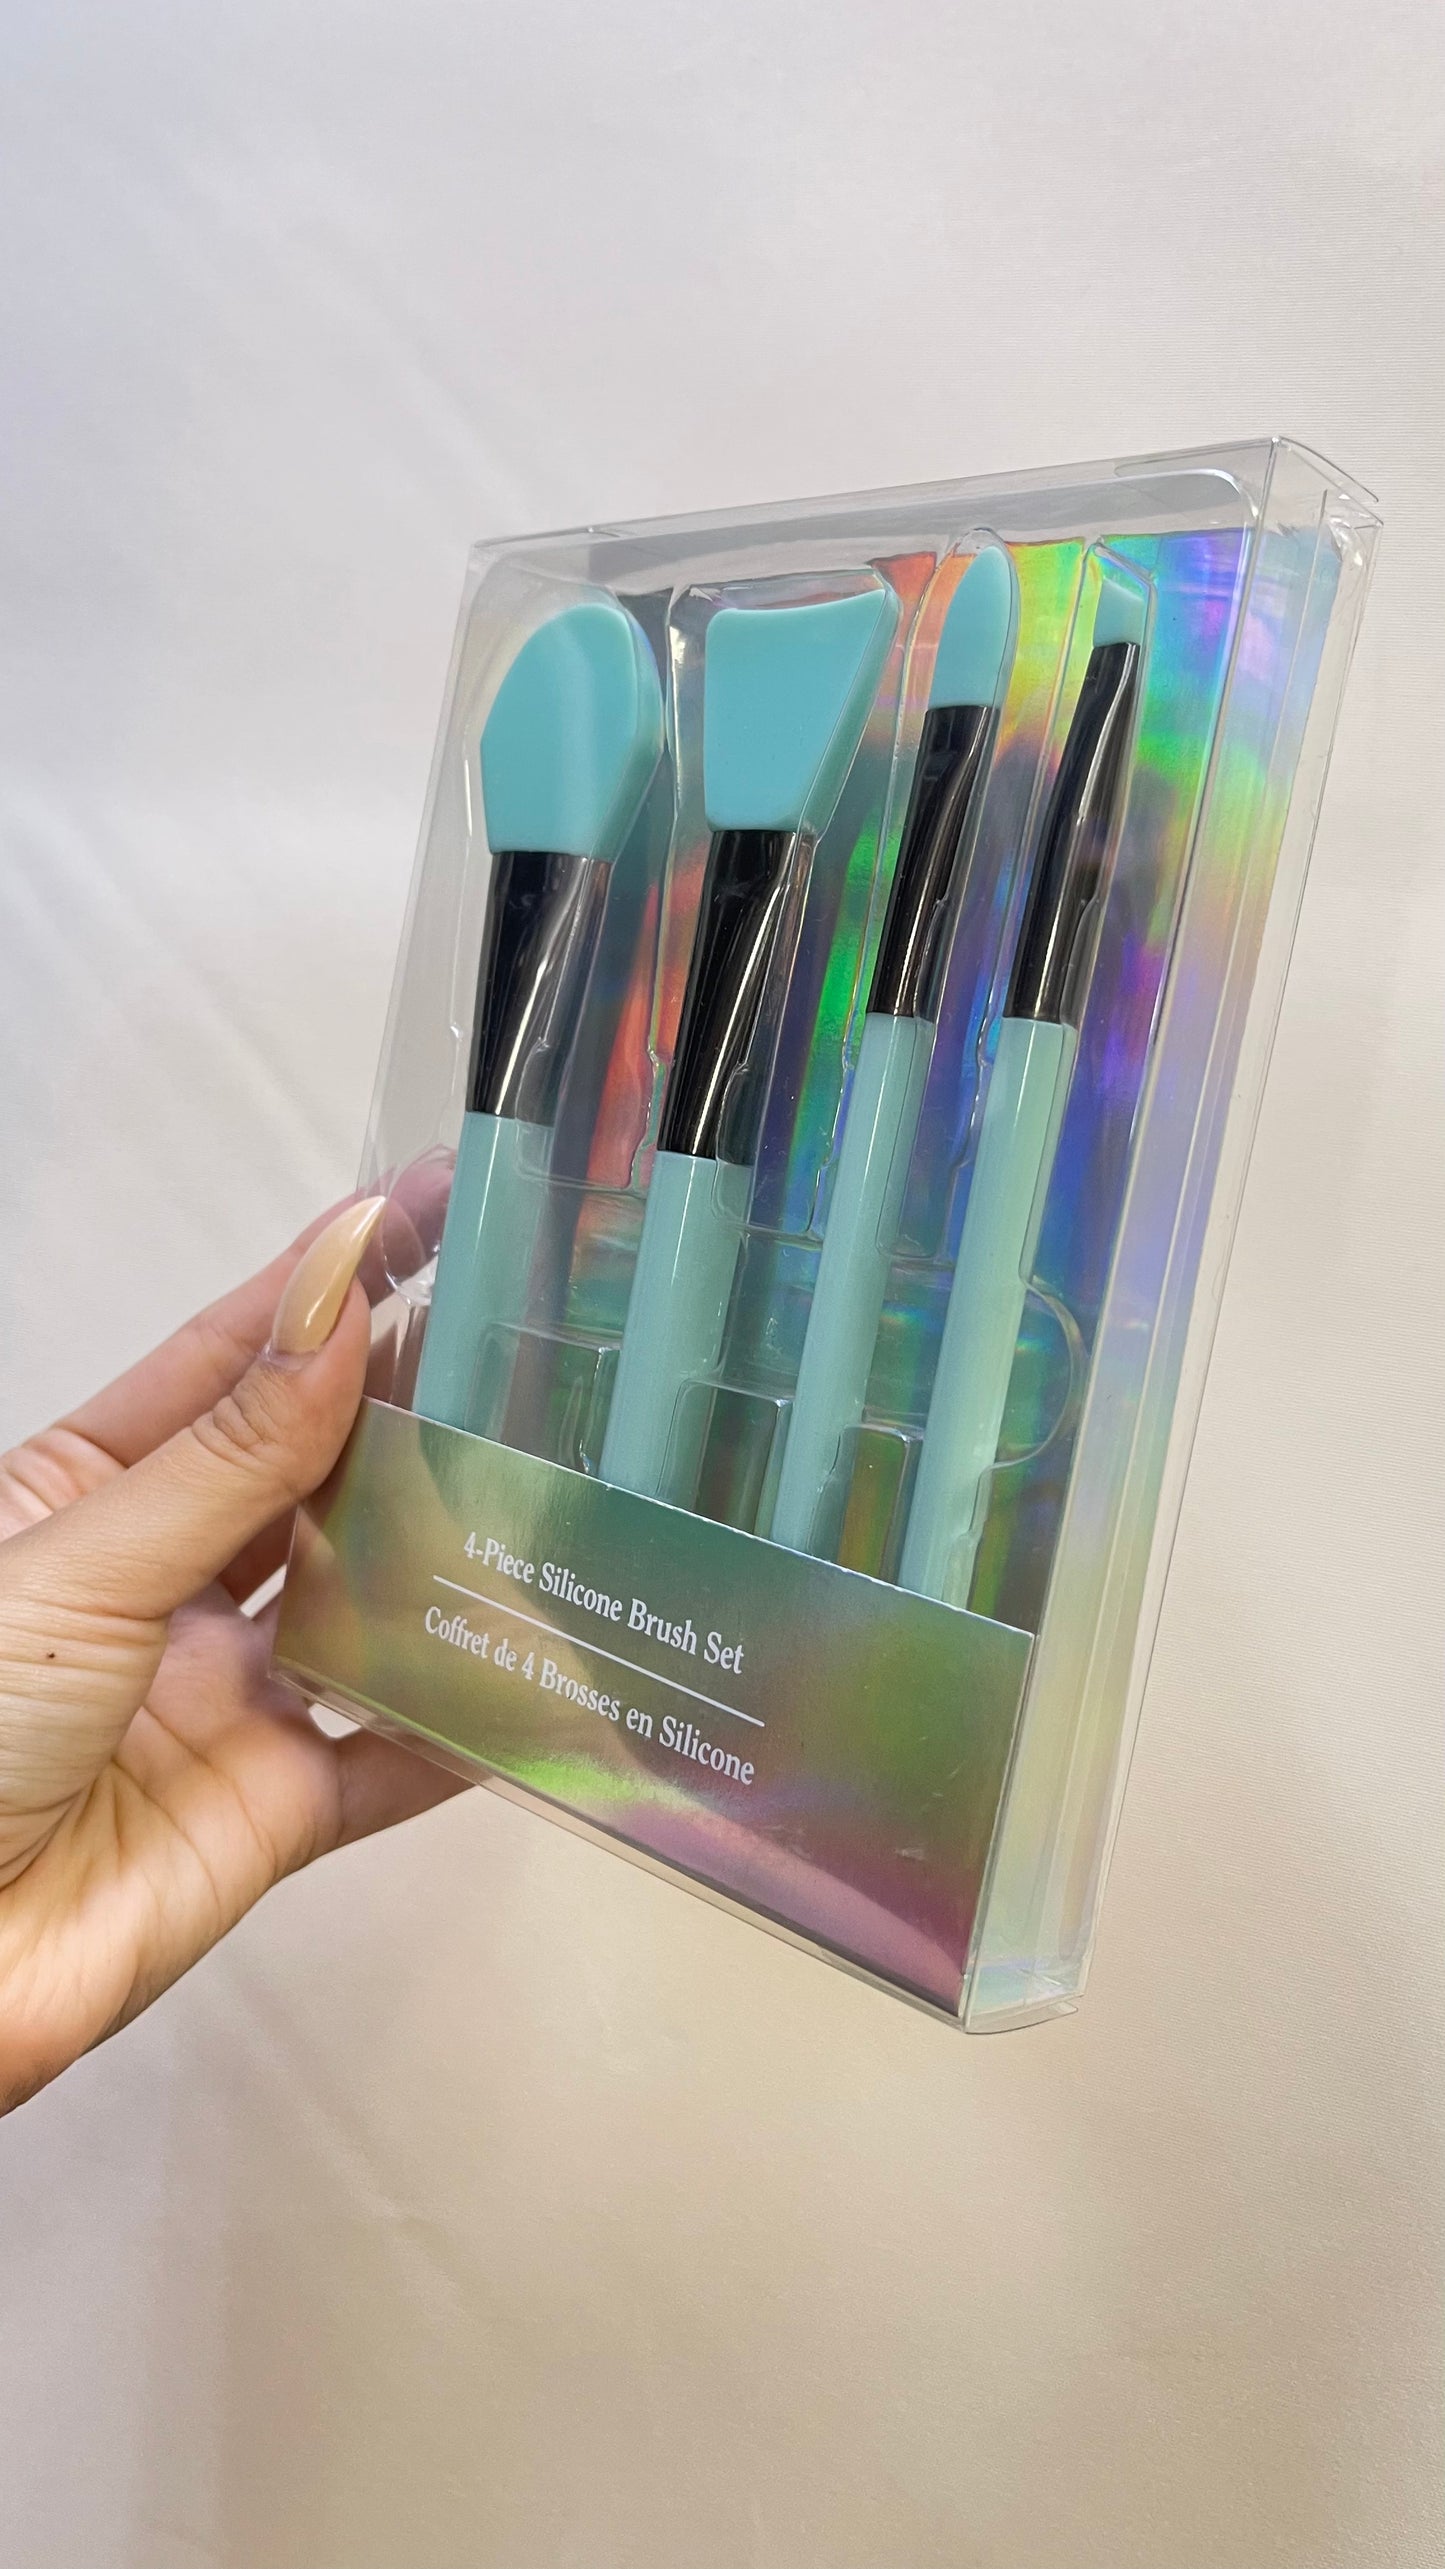 Urban Outfitters Baby Blue Silicone Brush Set